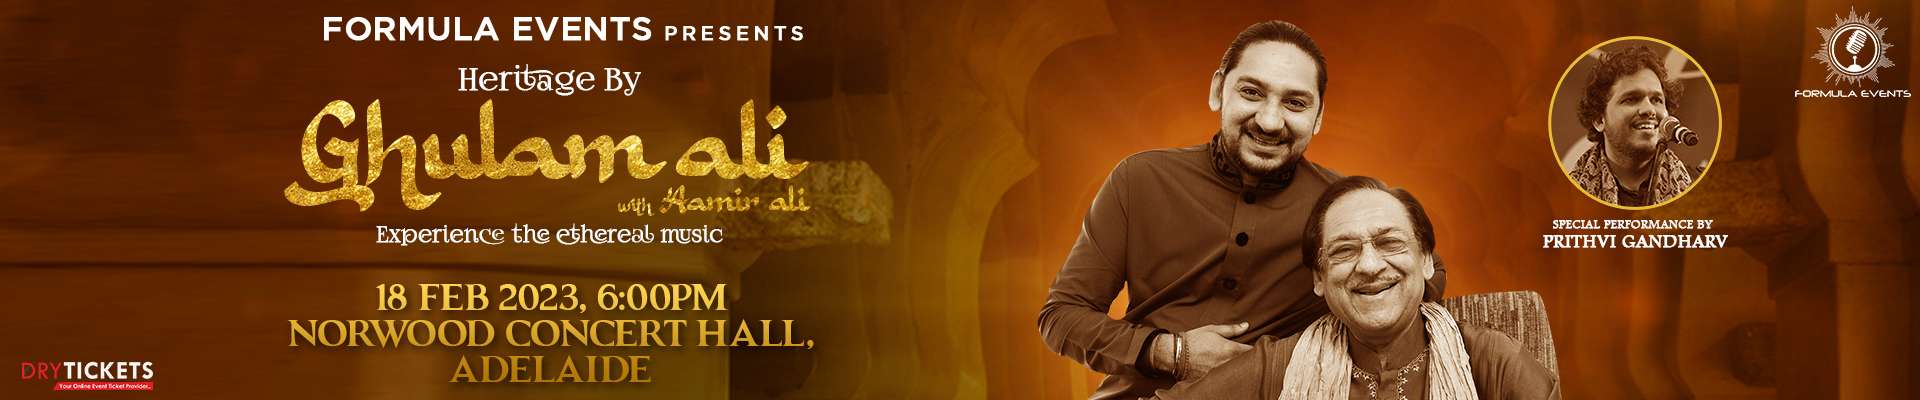 Heritage By Ghulam Ali, Experience the ethereal music Live In Concert Adelaide